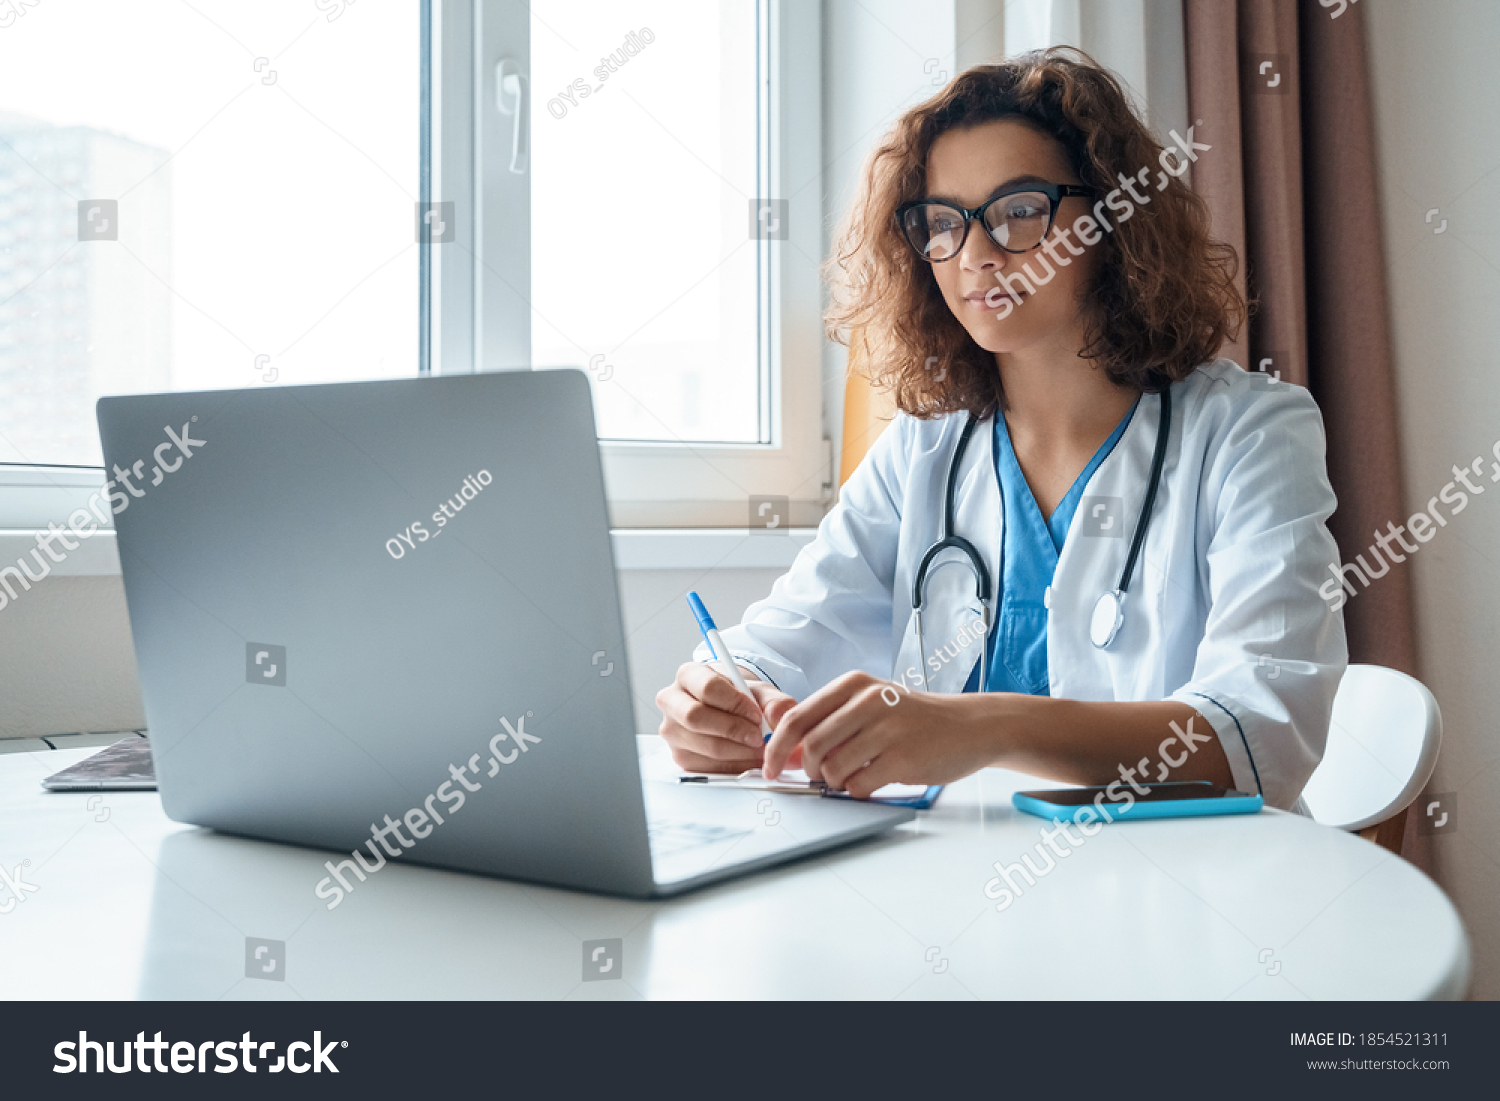 Attractive female doctor make online video call consult patient on laptop. Medical assistant young woman therapist videoconferencing to web camera. Telemedicine concept. Online doctor appointment. #1854521311